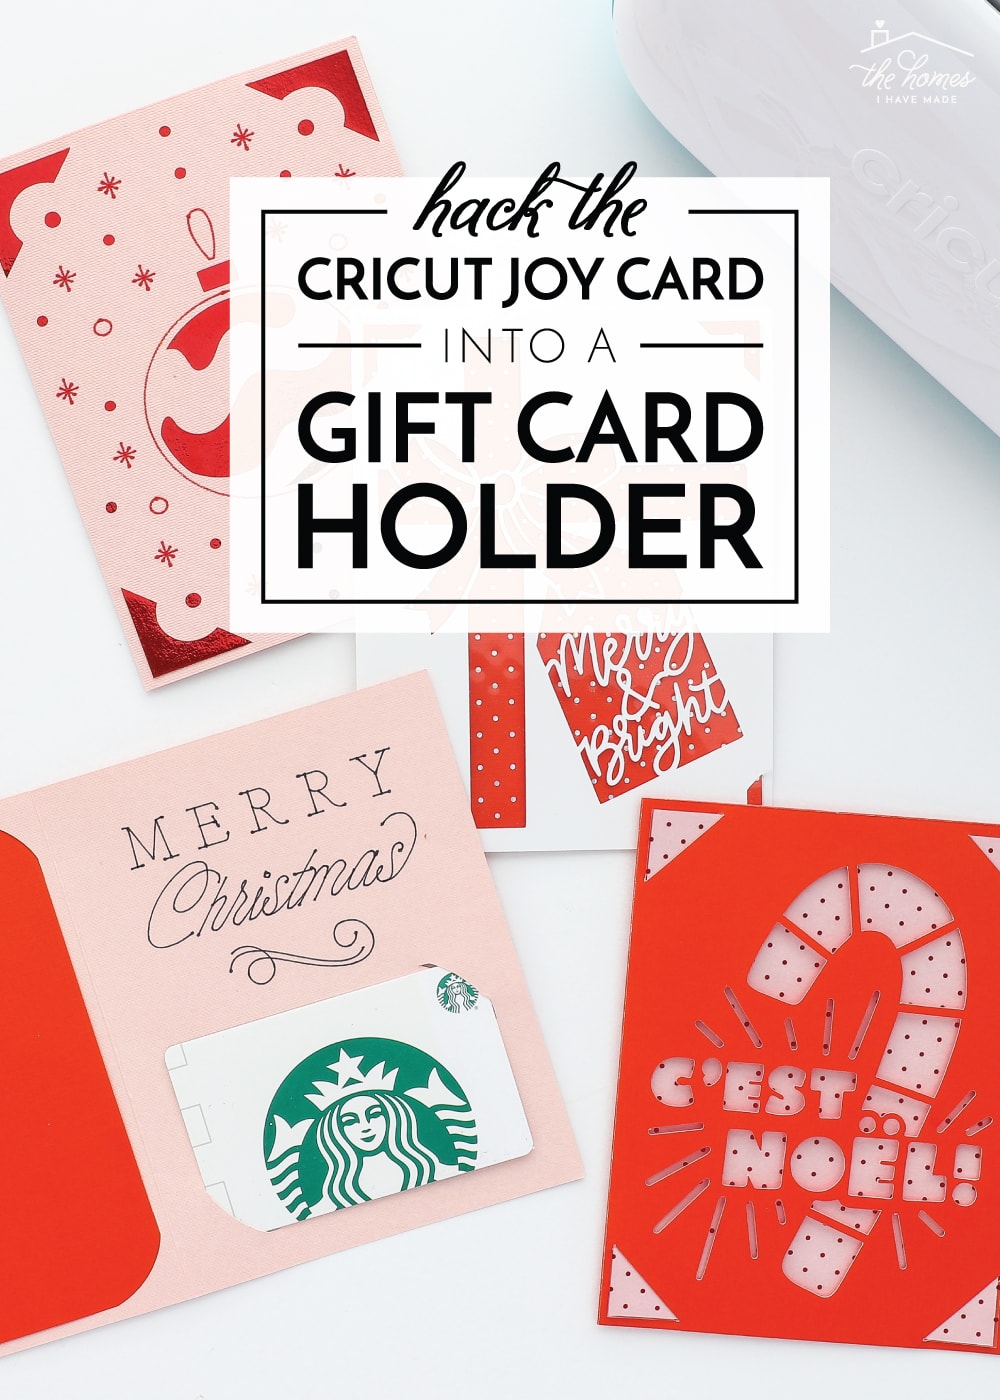 Hack Any Cricut Joy Card Into a Gift Card Holder! - The Homes I Have Made